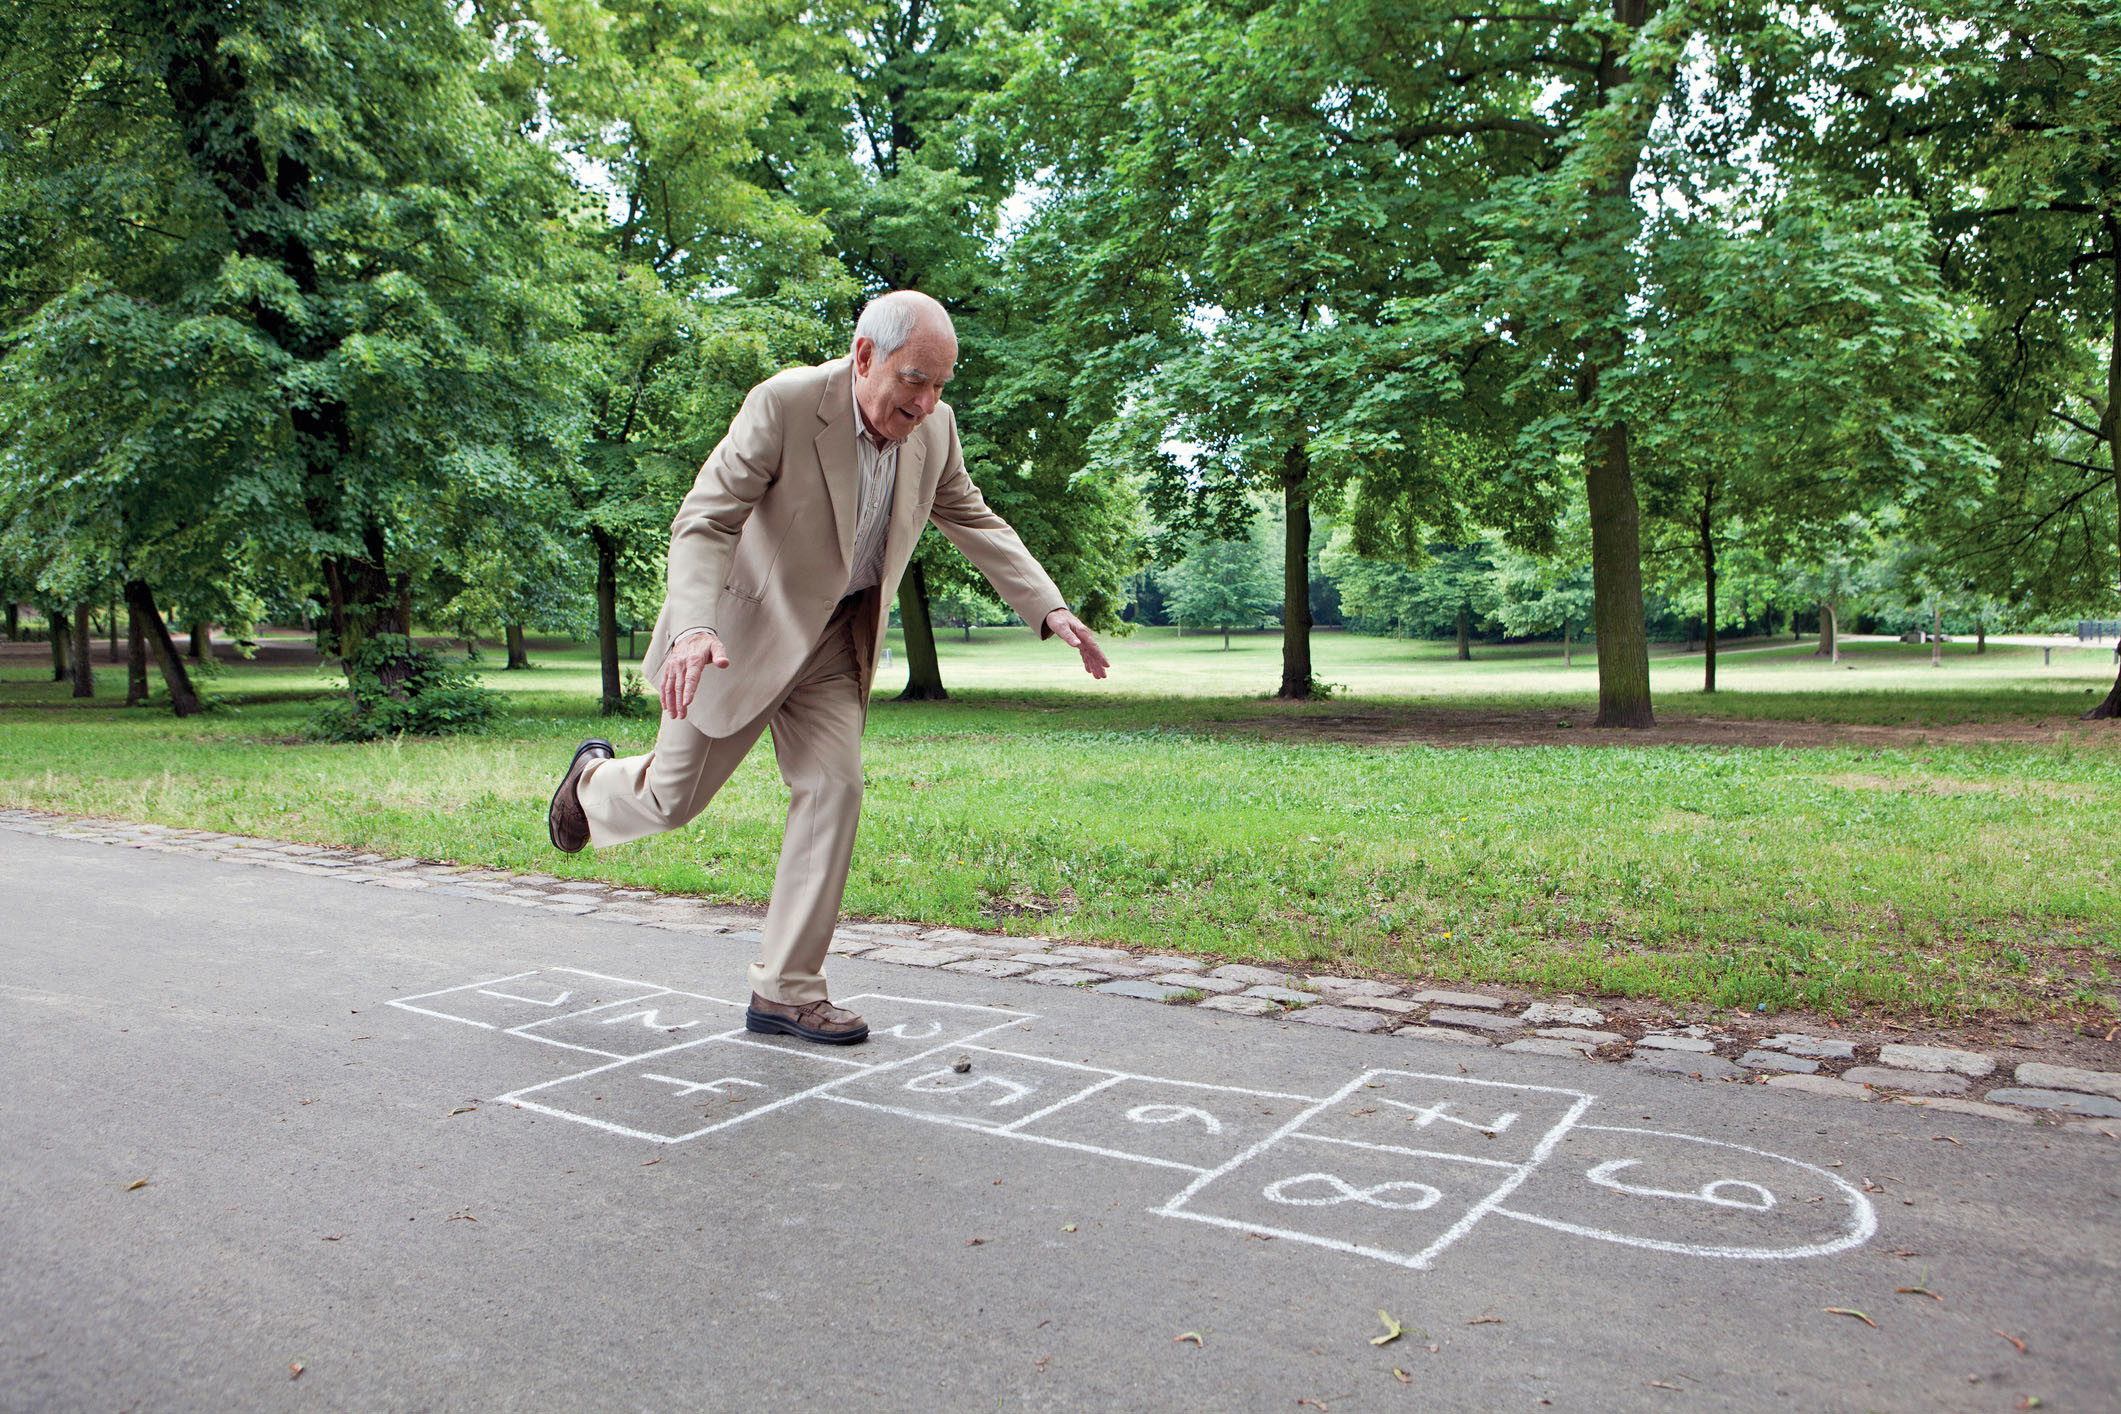 photo of an older man jumping through a game of hopscotch drawn on a sidewalk in a park